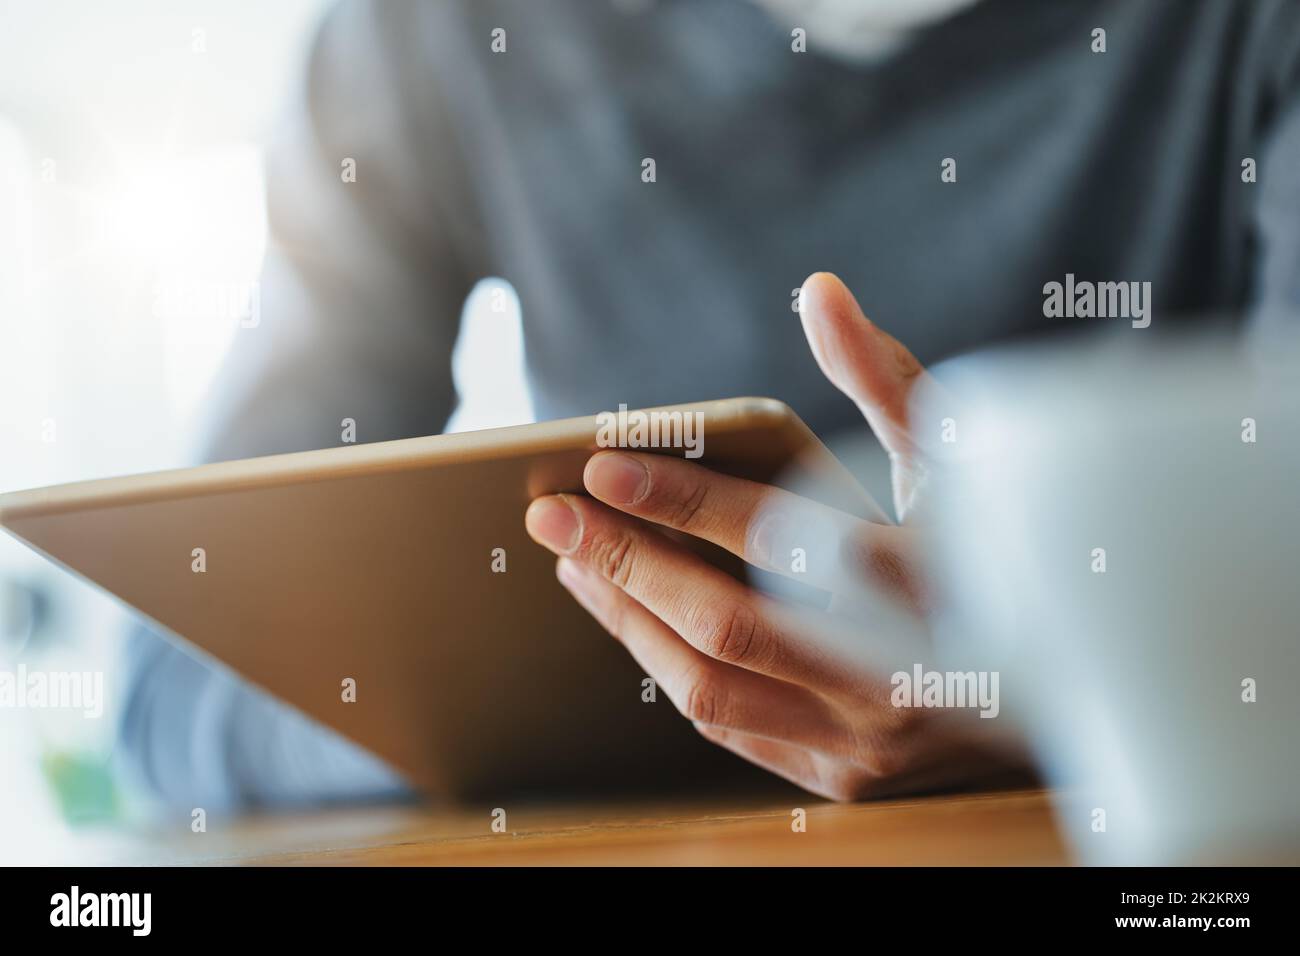 Hand of a Black man holding a tablet pc Stock Photo